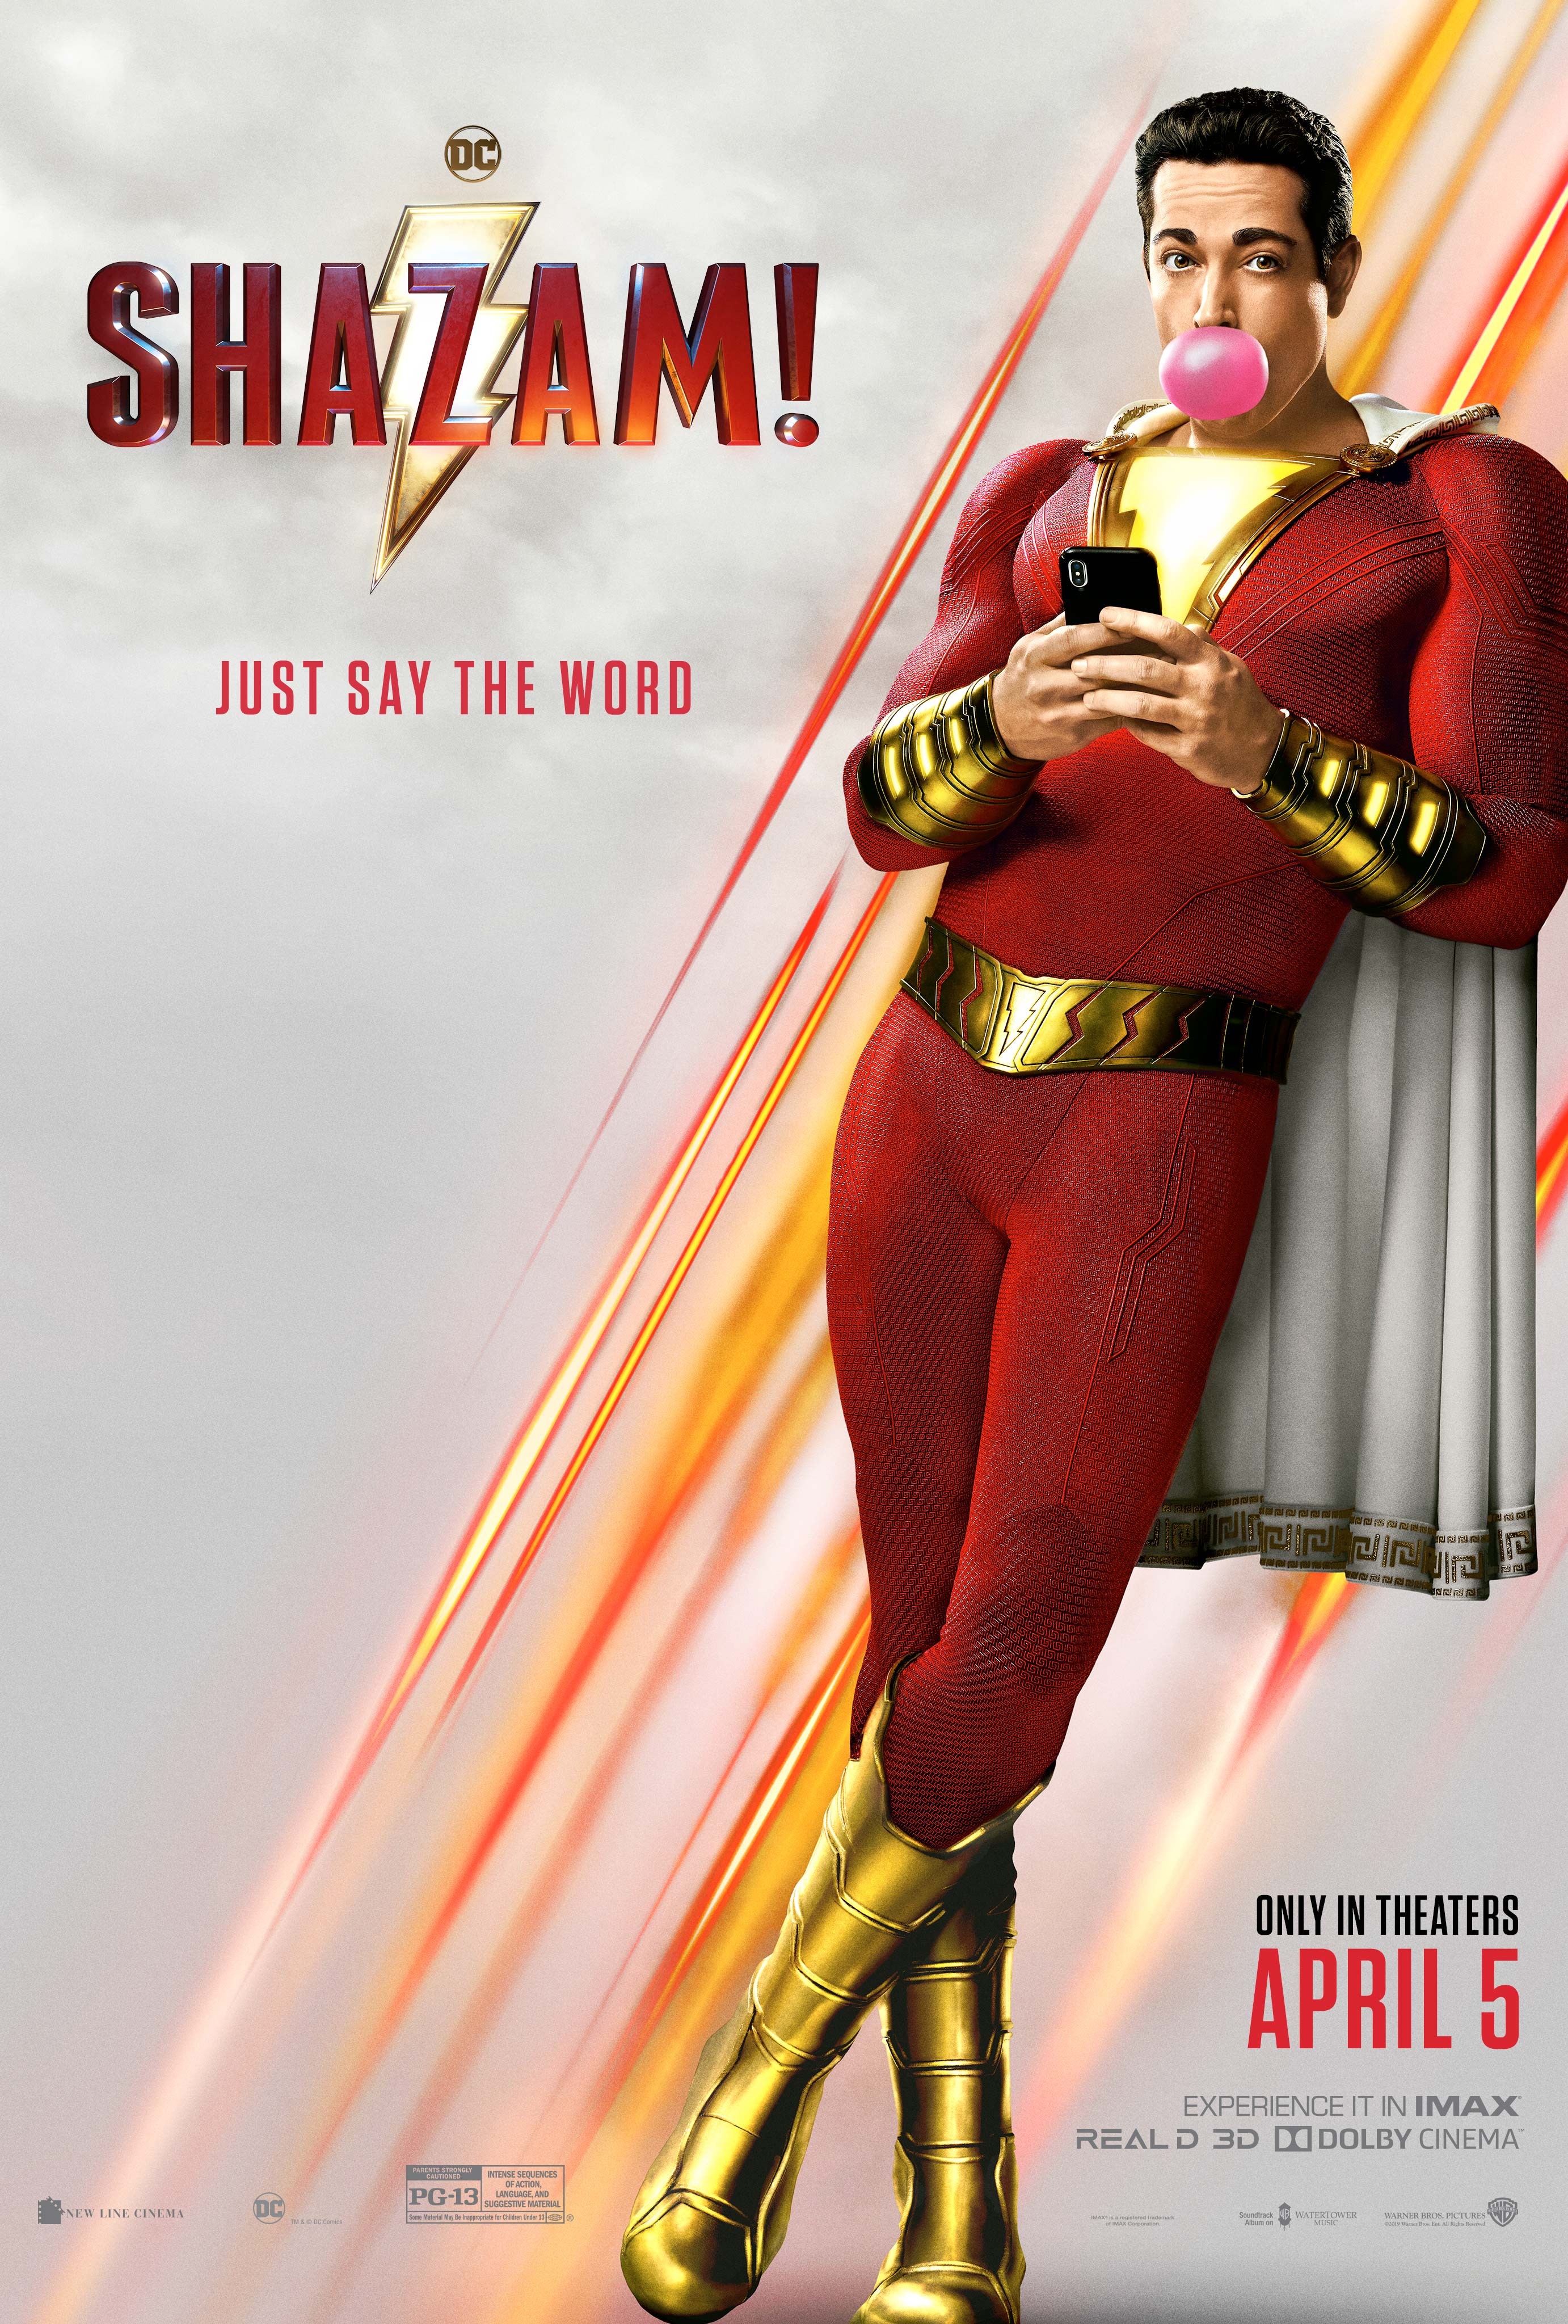 Shazam 2019 Rotten Tomatoes There's a sinbad shazam movie that a bunch of people claim they've seen, even though no evidence of its existence had been found. shazam 2019 rotten tomatoes